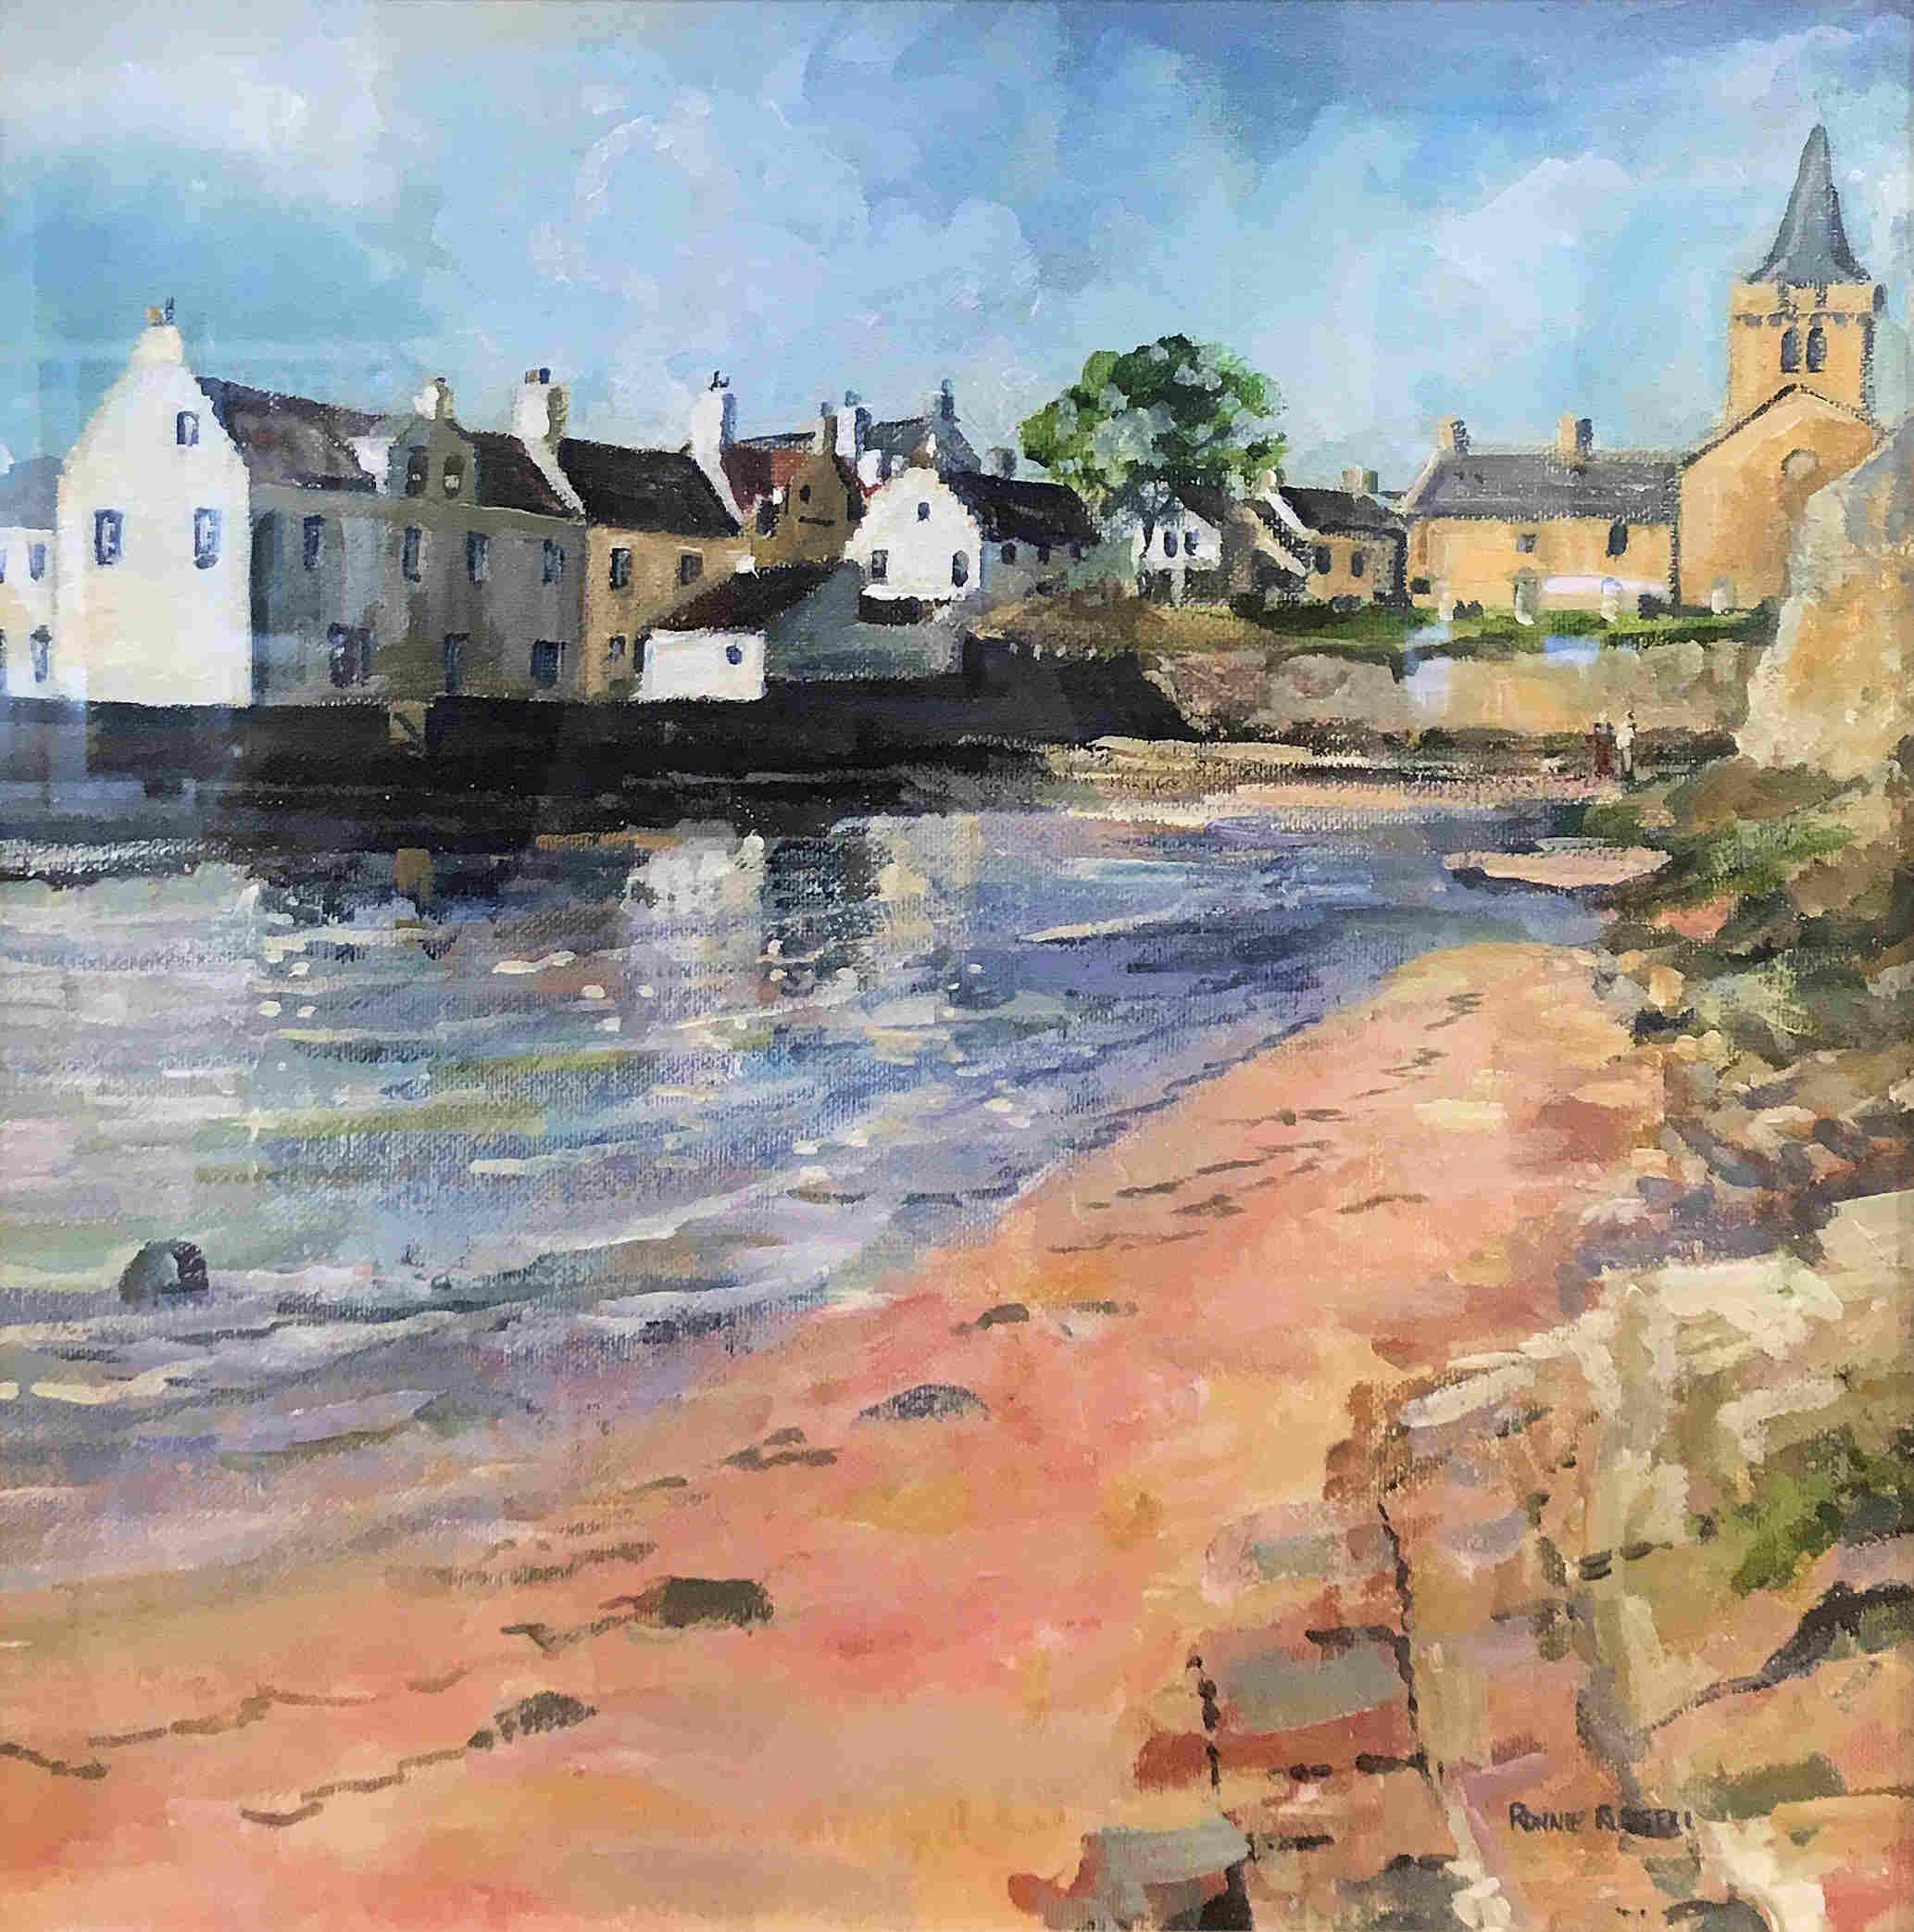 'Reflections, Anstruther' by artist Ronnie Russell